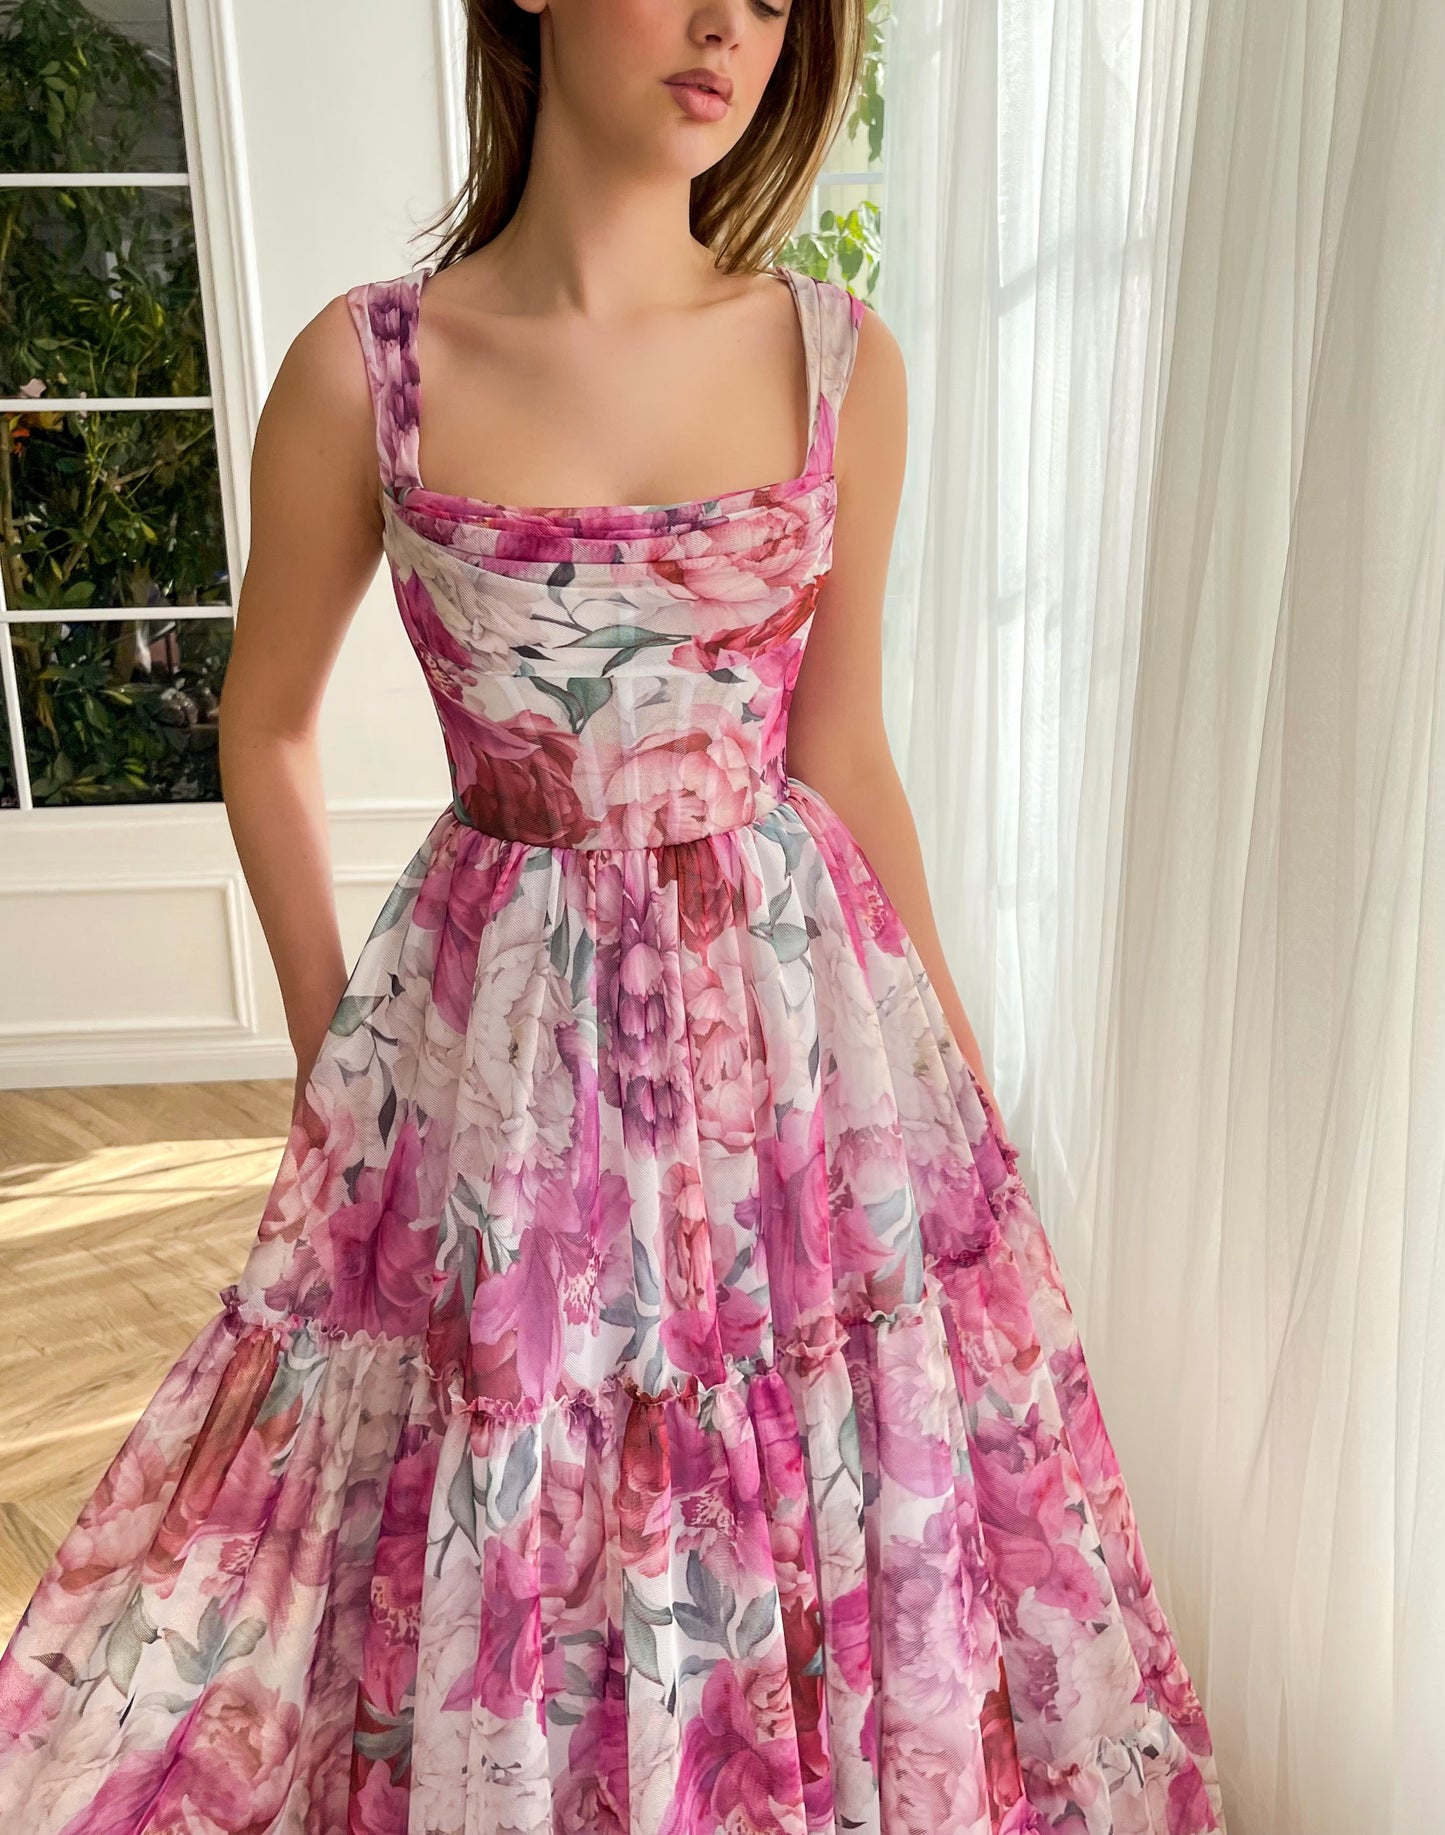 Pink A-Line dress with printed flowers and straps